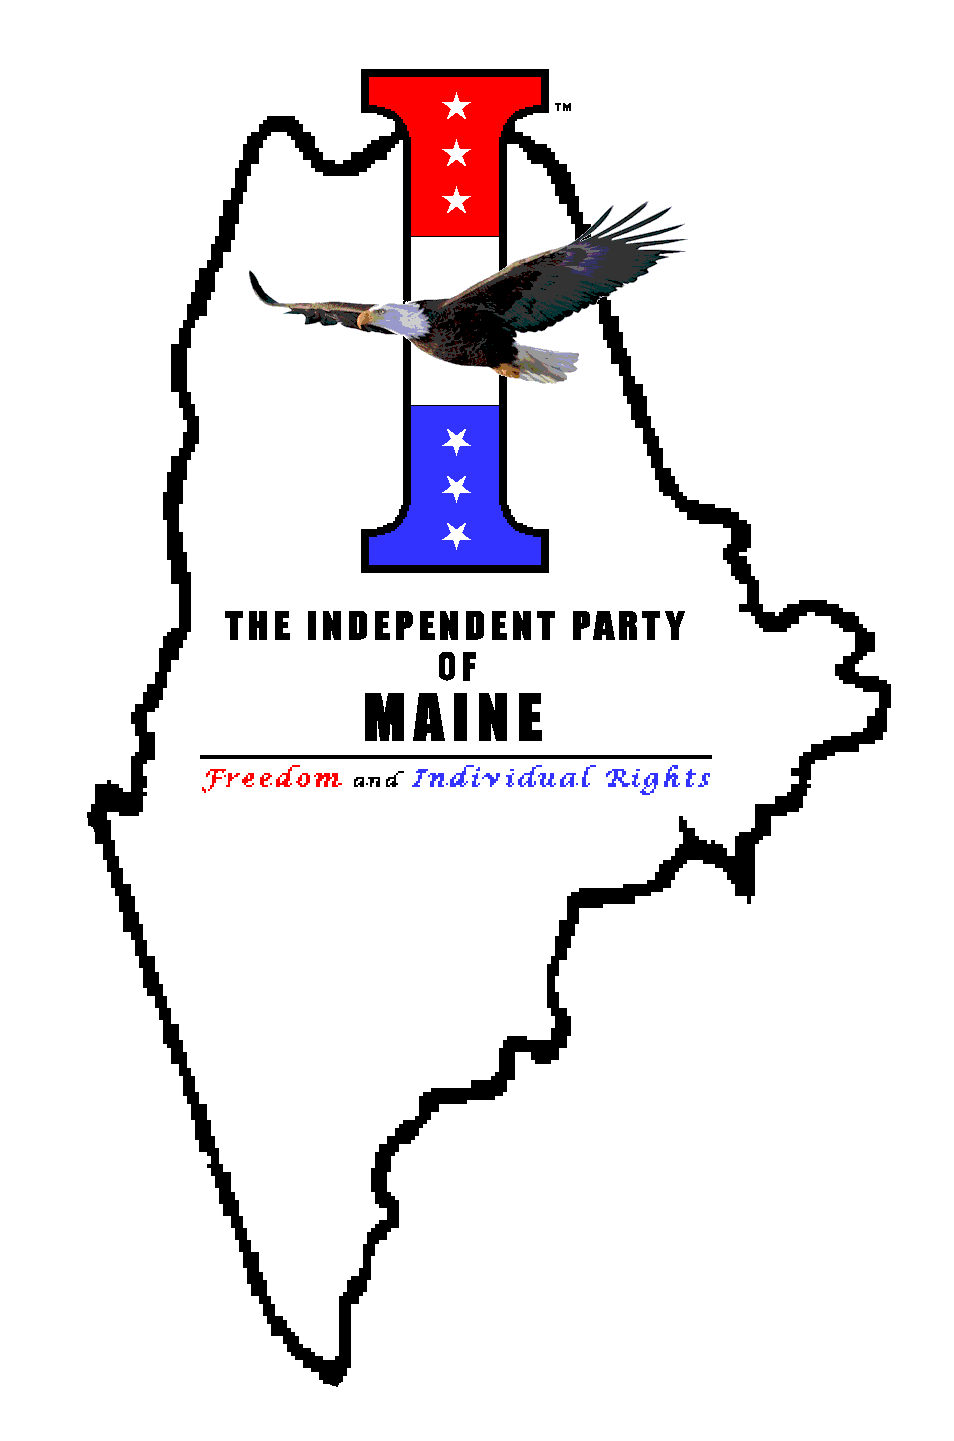 The Independent Party of Maine!